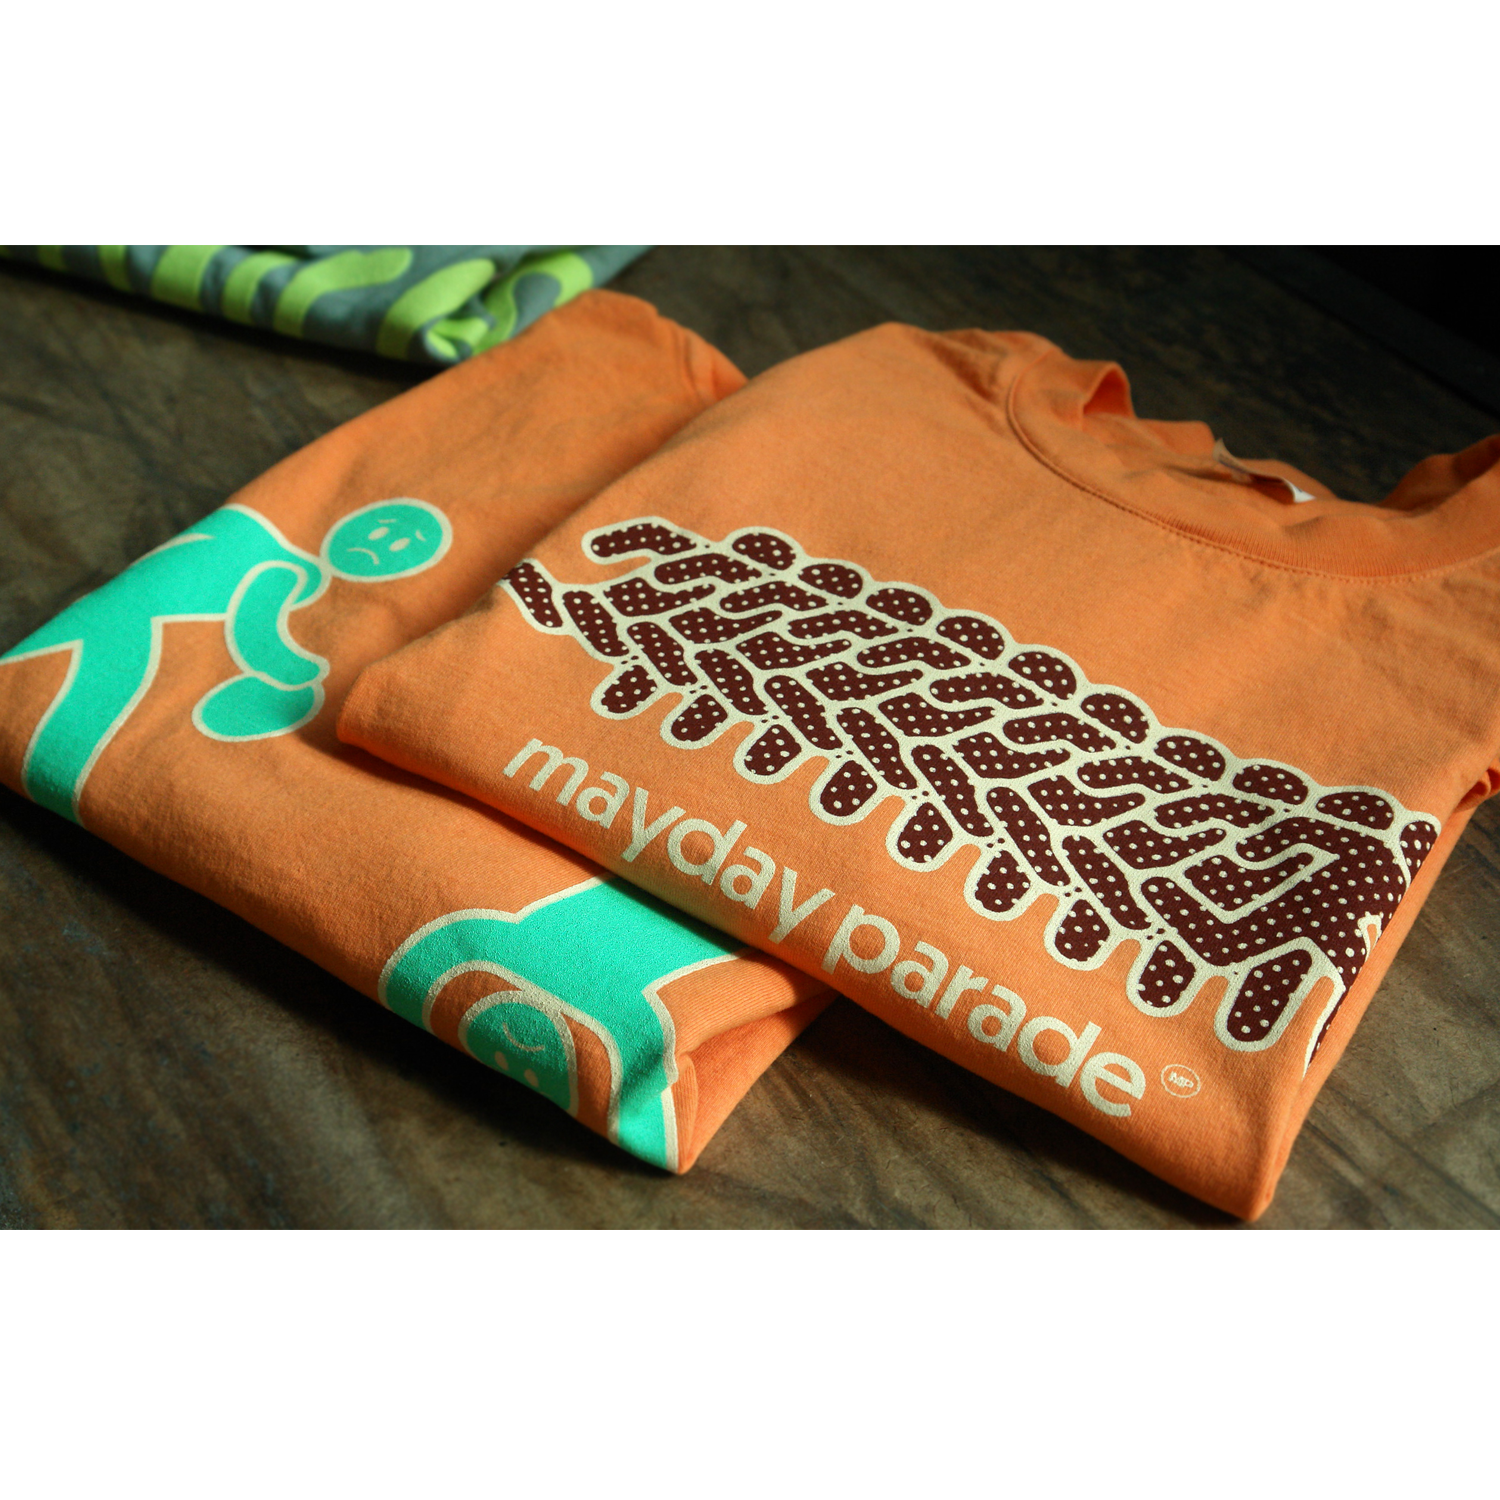 folded front and back image of a citrus orange tee shirt on a wood background. front of tee is on the right and has a running man across the front chest in maroon print and says mayday parade in white below. the back of the tee is on the left and has a full back print. in green shows a man three times, dribbling a ball, standing on his head and lifting weights. emo athleisure club is stacked in white on the bottom right of the shirt, and also says a lifestyle of sadness.